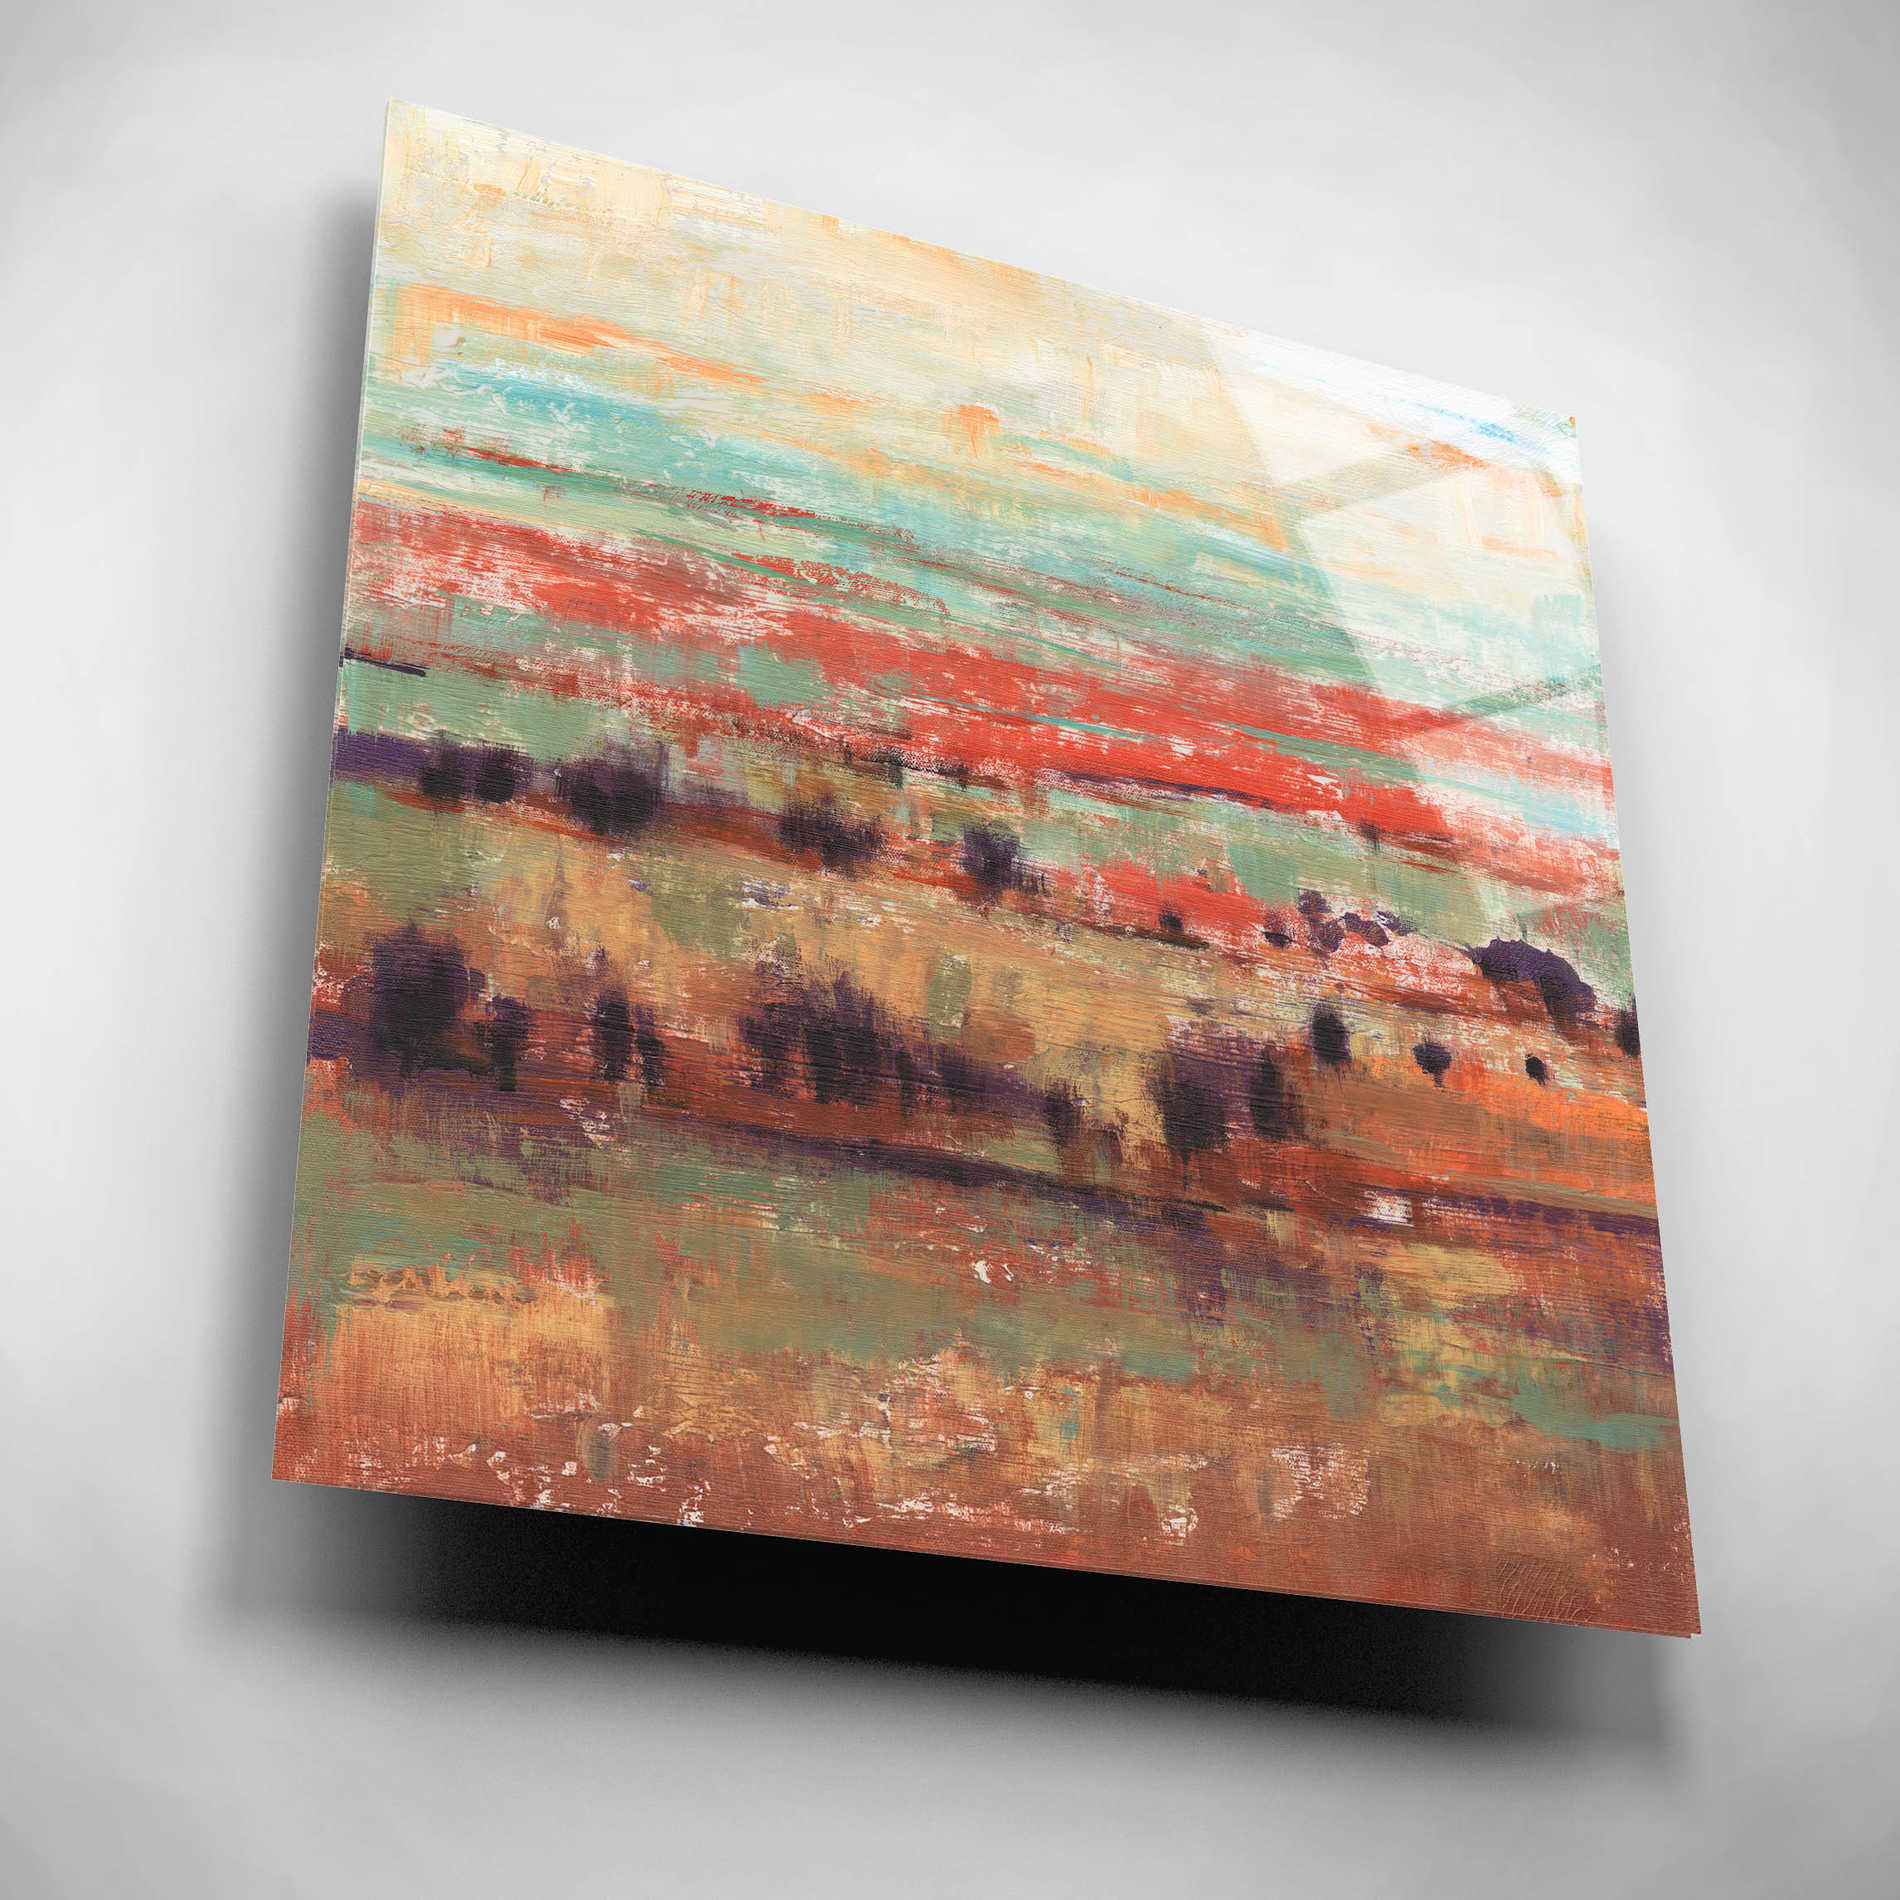 Epic Art 'Divided Landscape I' by Tim O'Toole, Acrylic Glass Wall Art,12x12